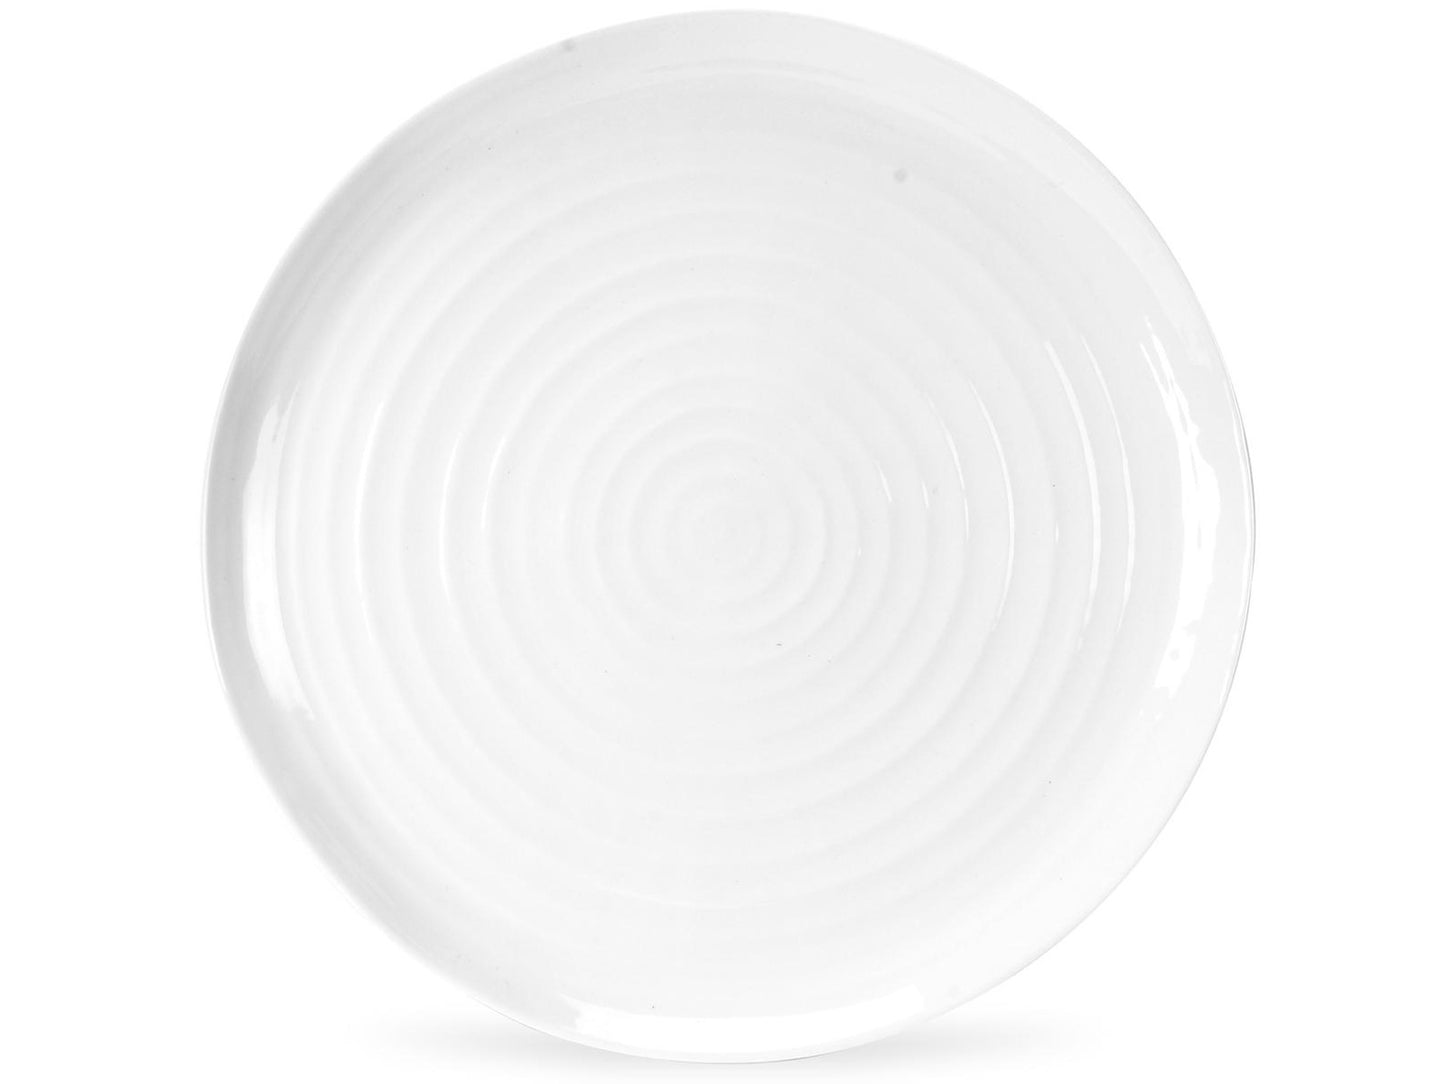 This Sophie Conran Round Platter (30.5cm) is ideal for serving up canapés at a dinner party. Designed with her staple rippling effect, this piece is stylish and contemporary, and is made of a white porcelain with a clear glaze finish.